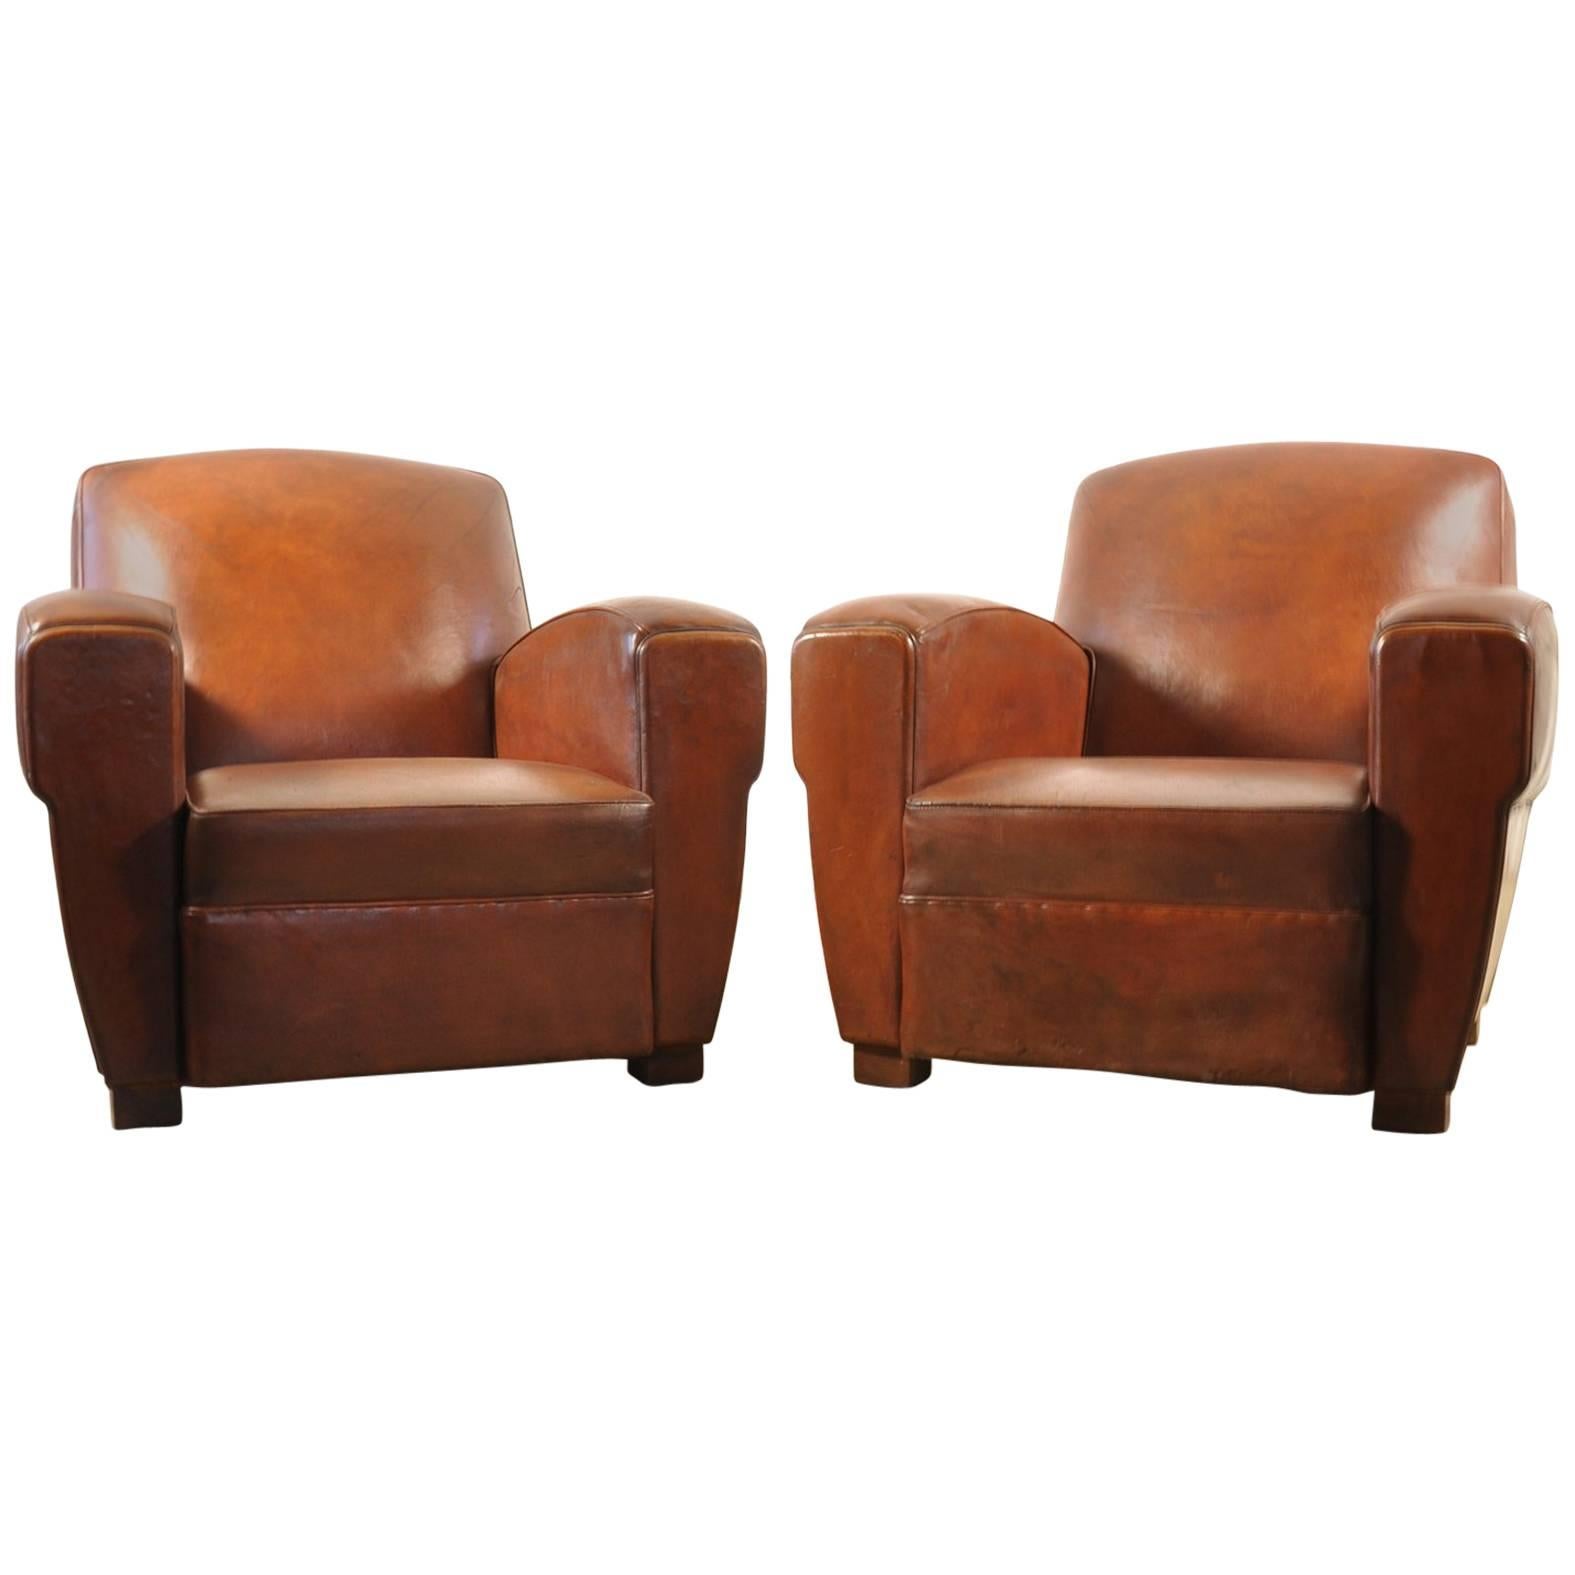 Pair of 1940s Leather Armchairs For Sale